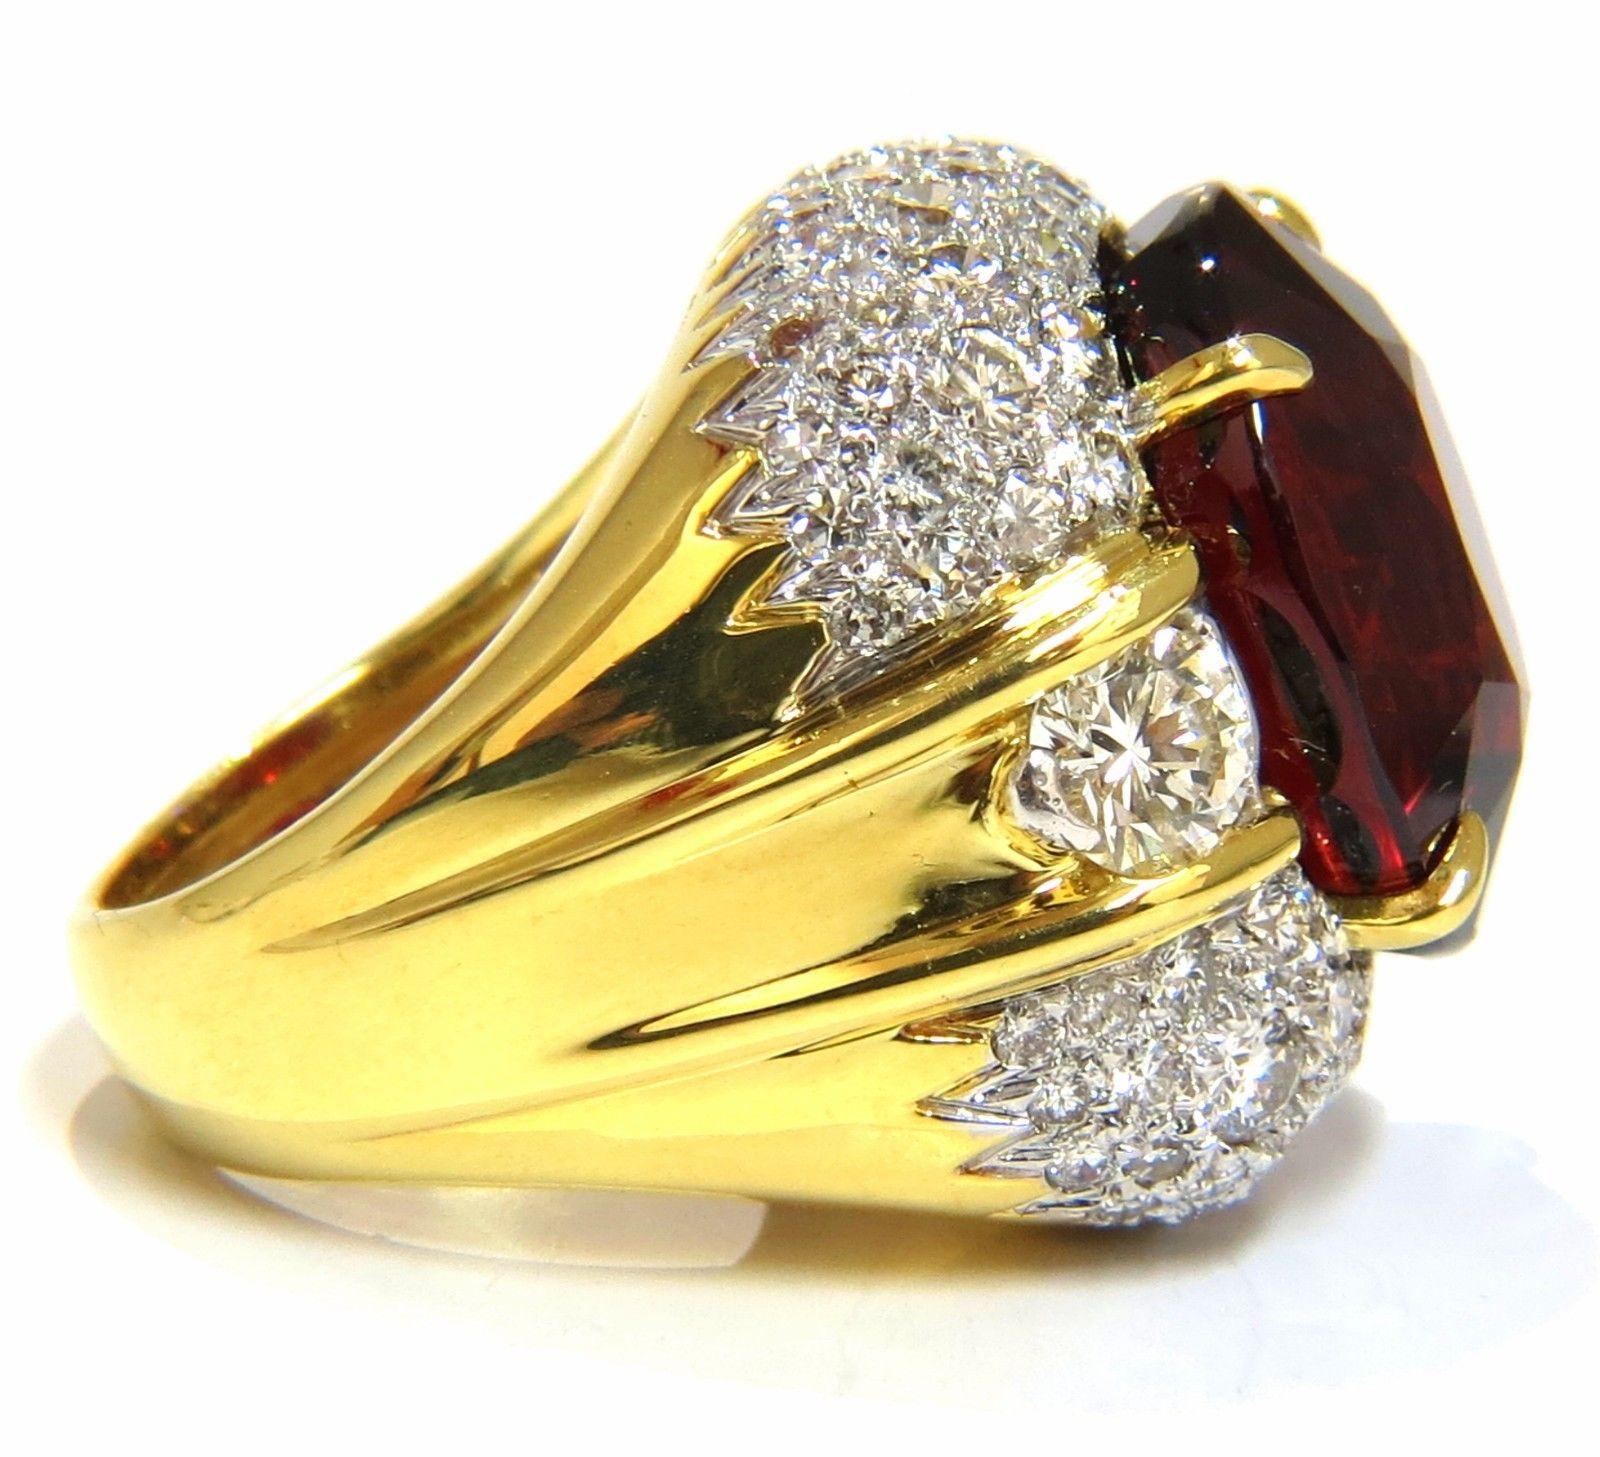 32.64ct GIA Natural Red Spessartite Garnet Diamonds Raised Dome Ring 18KT For Sale 1